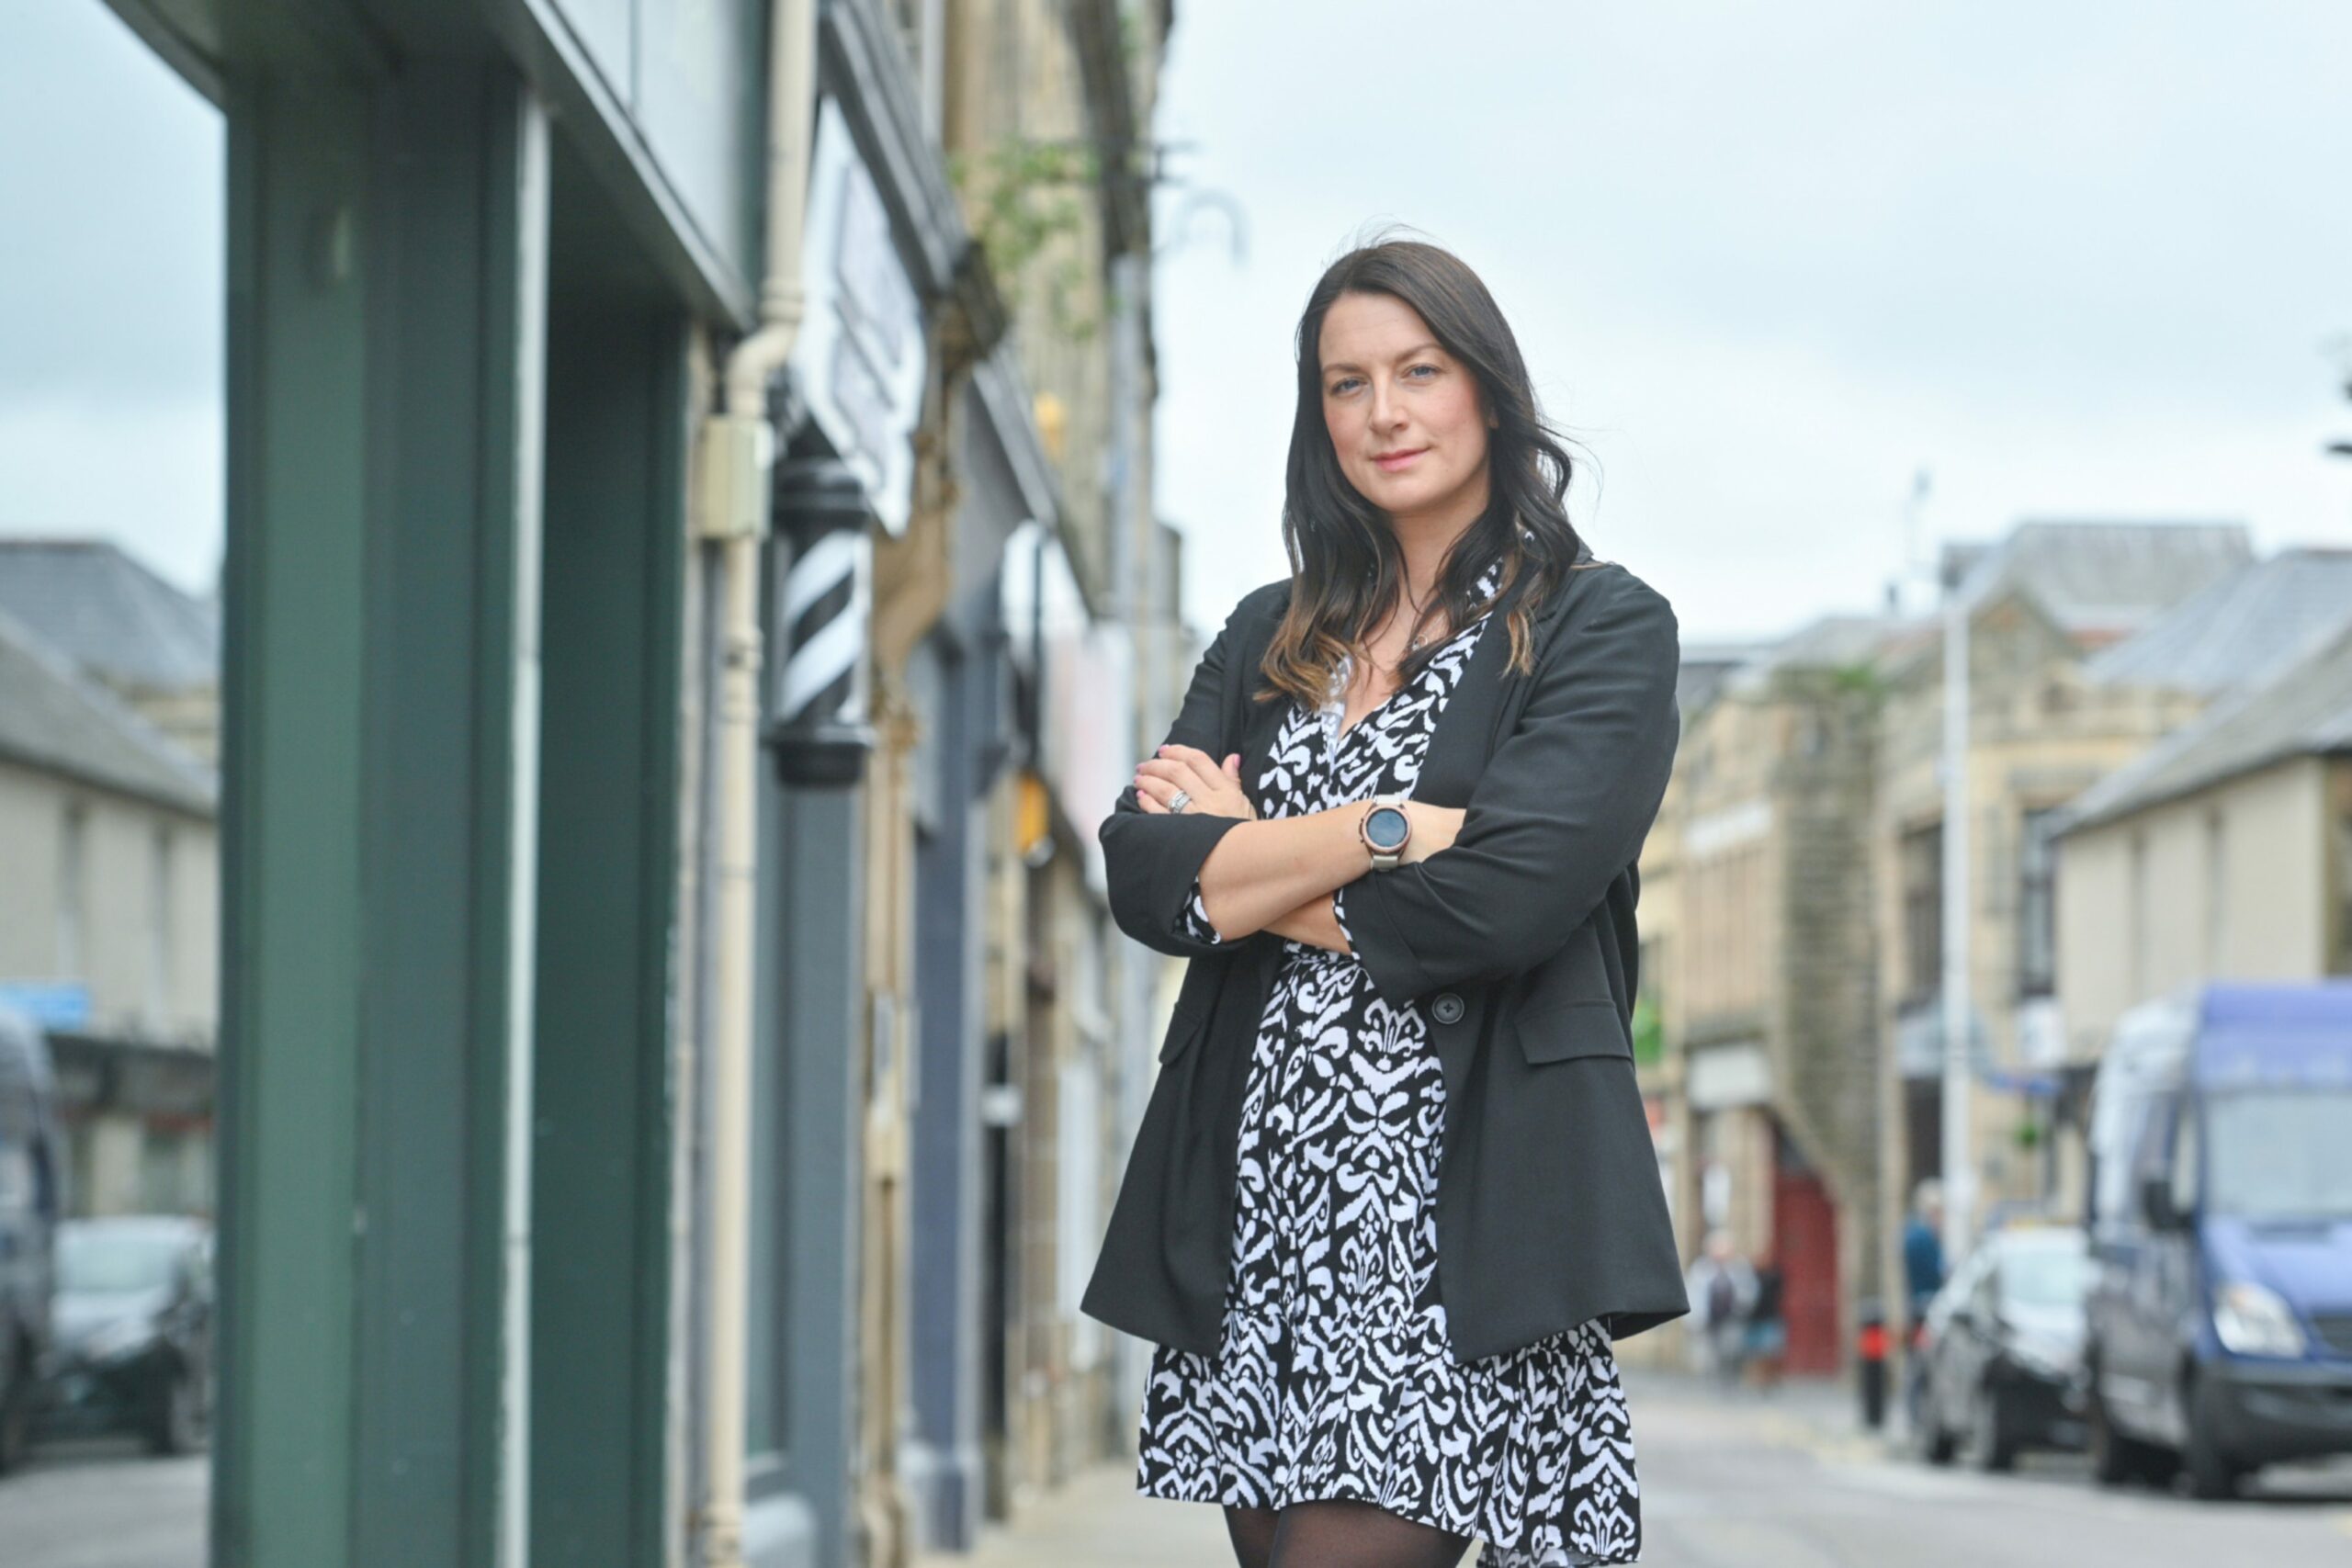 Moray Chamber of Commerce chief executive Sarah Medcraf with arms folded in Elgin town centre street. 